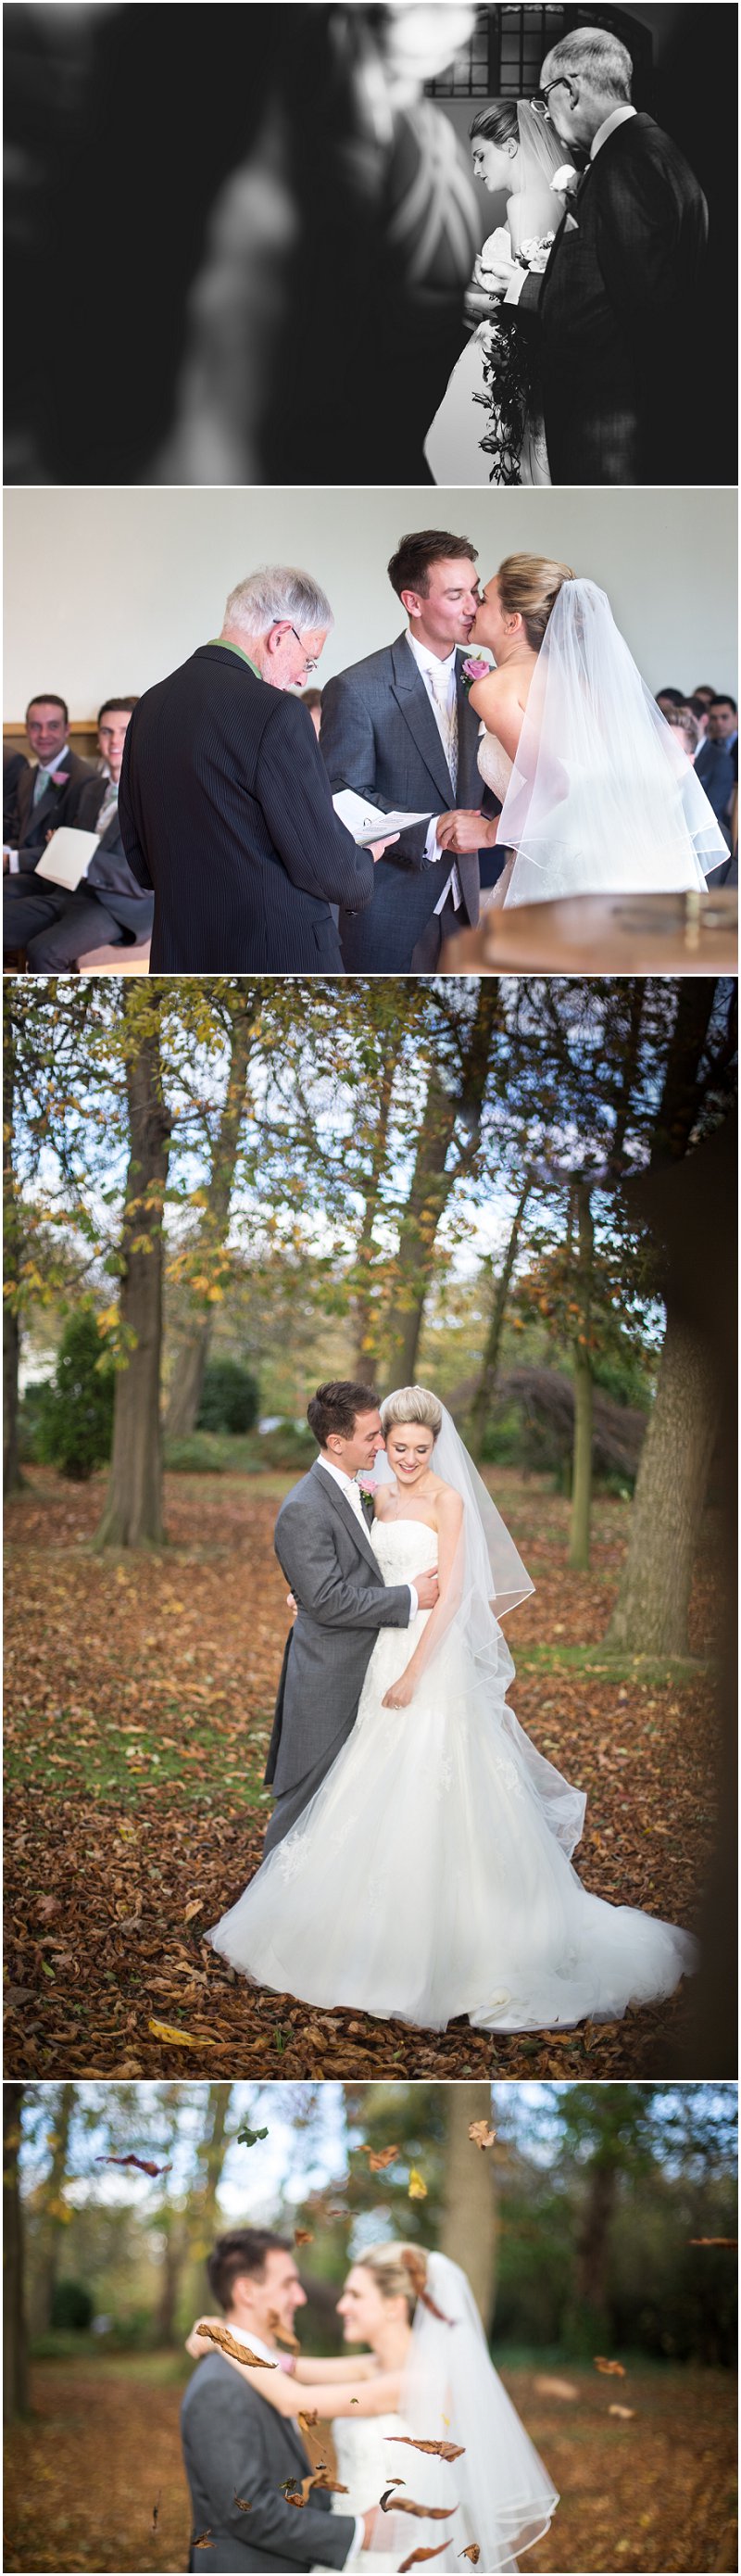 Wedding Photographer Crabwall Manor Chester